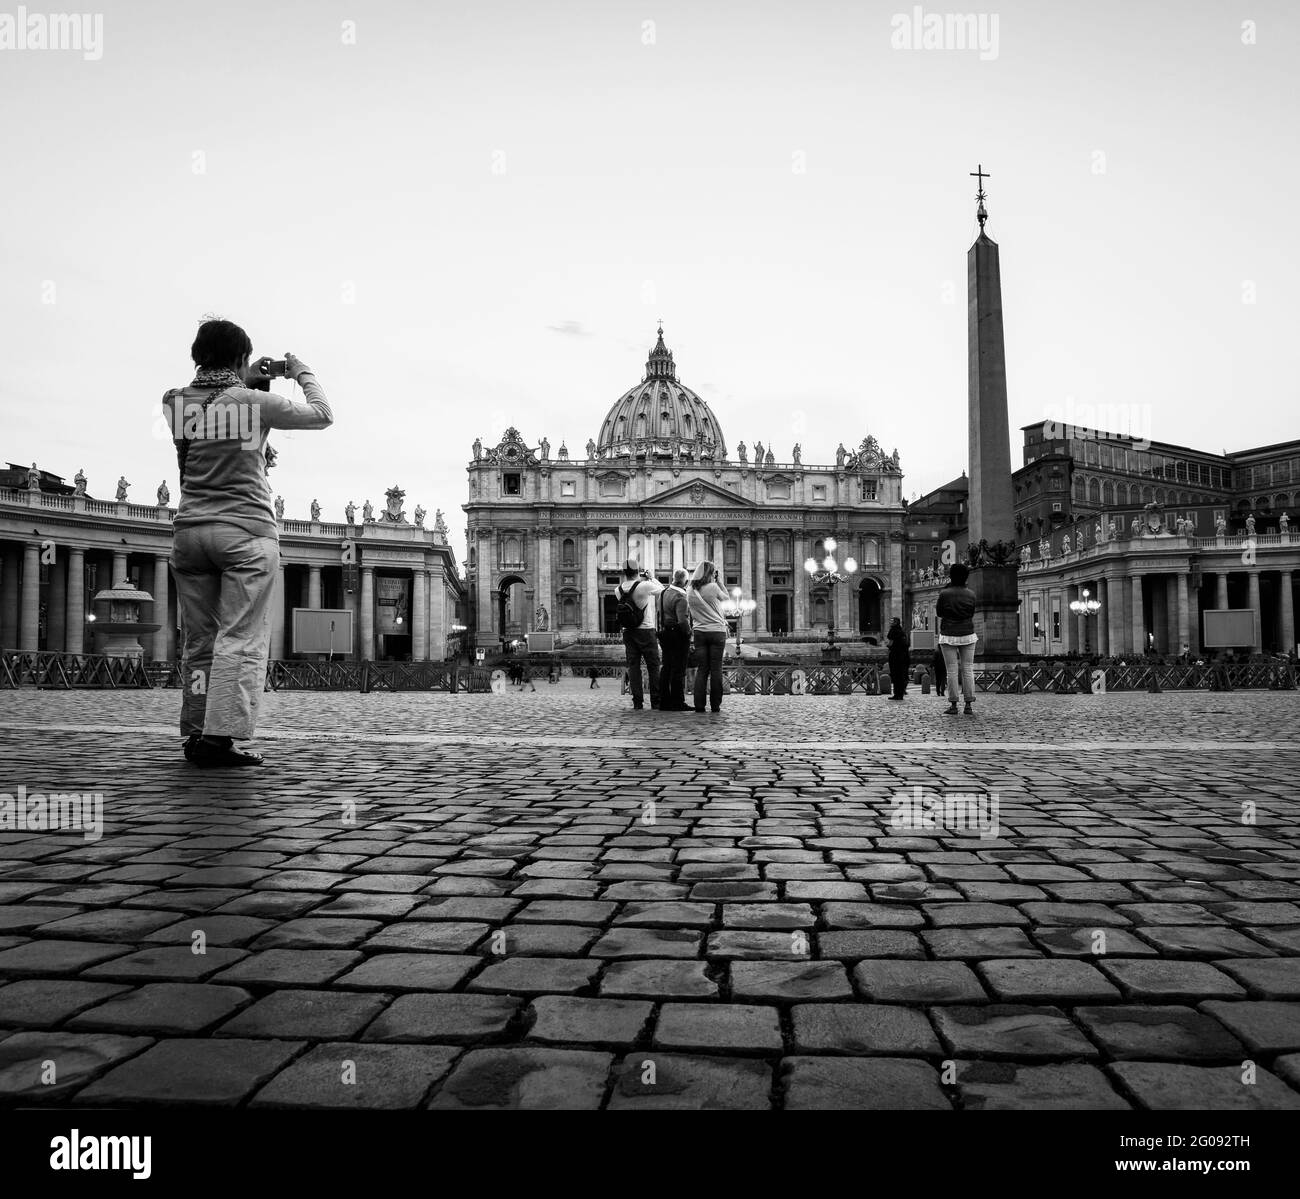 Rome, Italy.  St Peter's Basilica seen across St Peter's Square.  The historic centre of Rome is a UNESCO World Heritage Site. Stock Photo